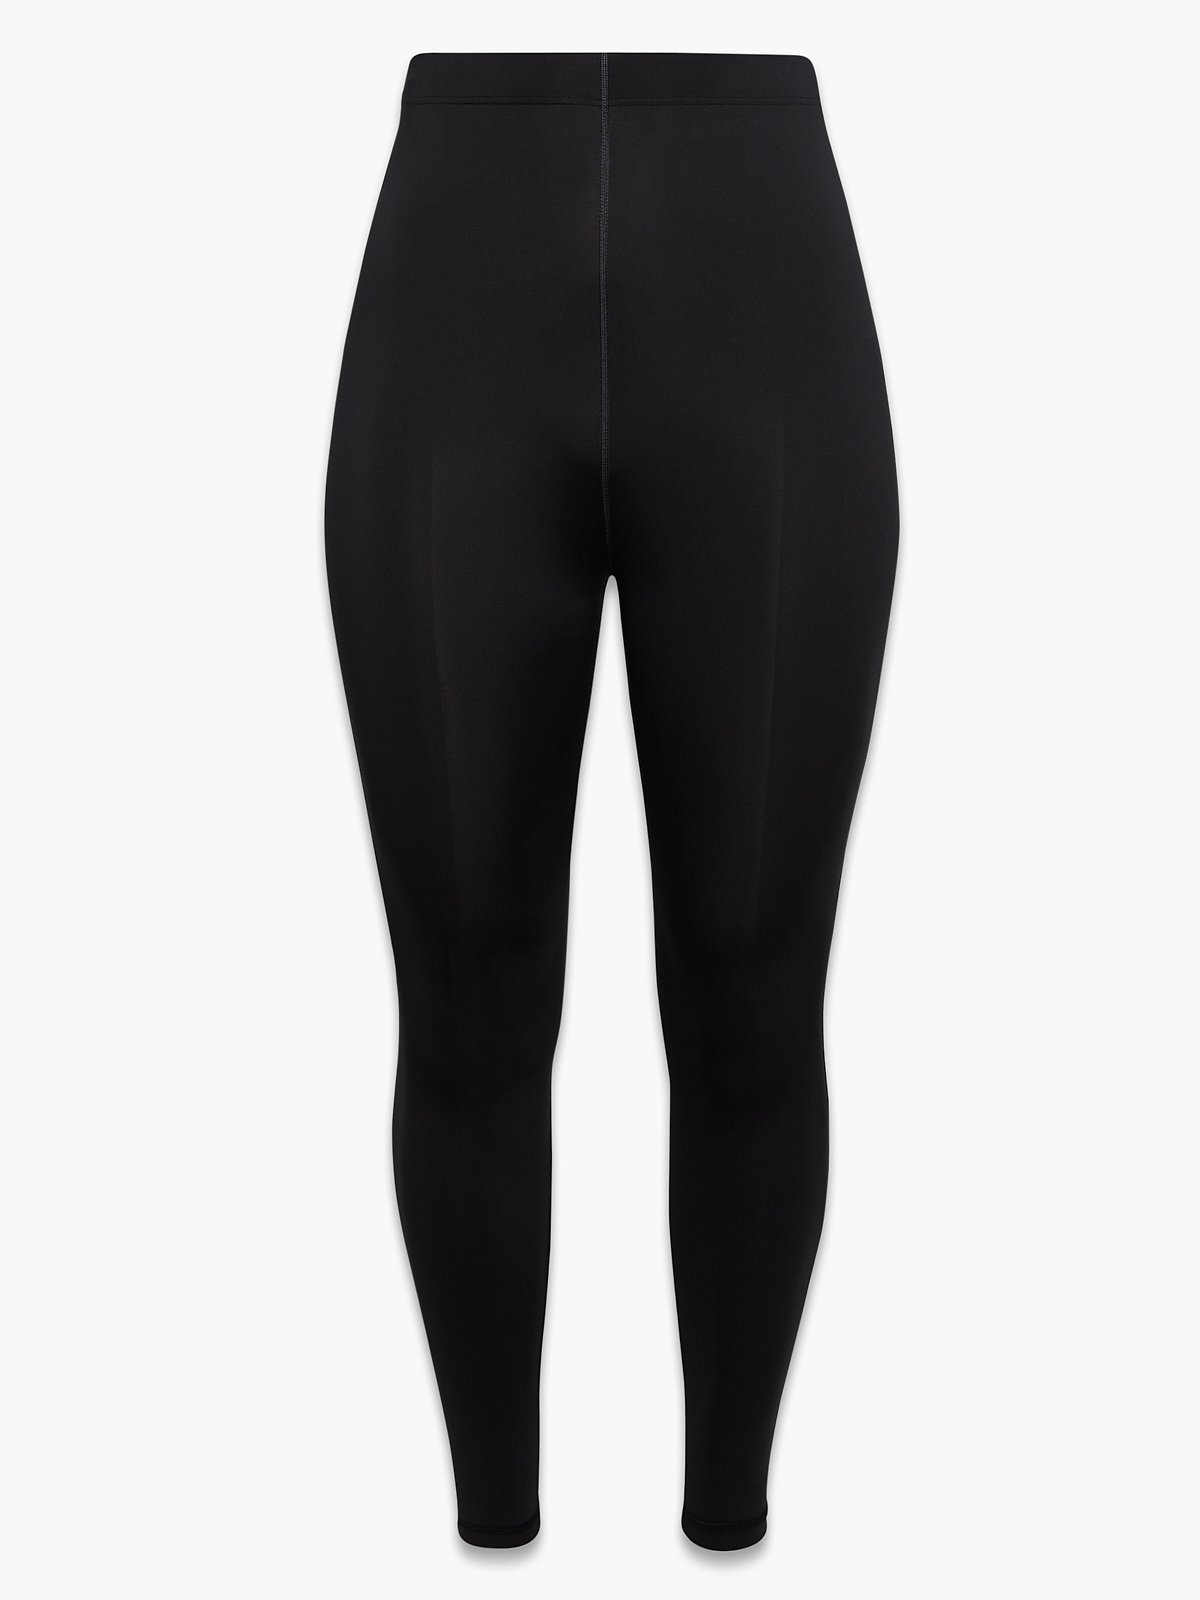 Buy Lacy Leatherette High Rise Leggings